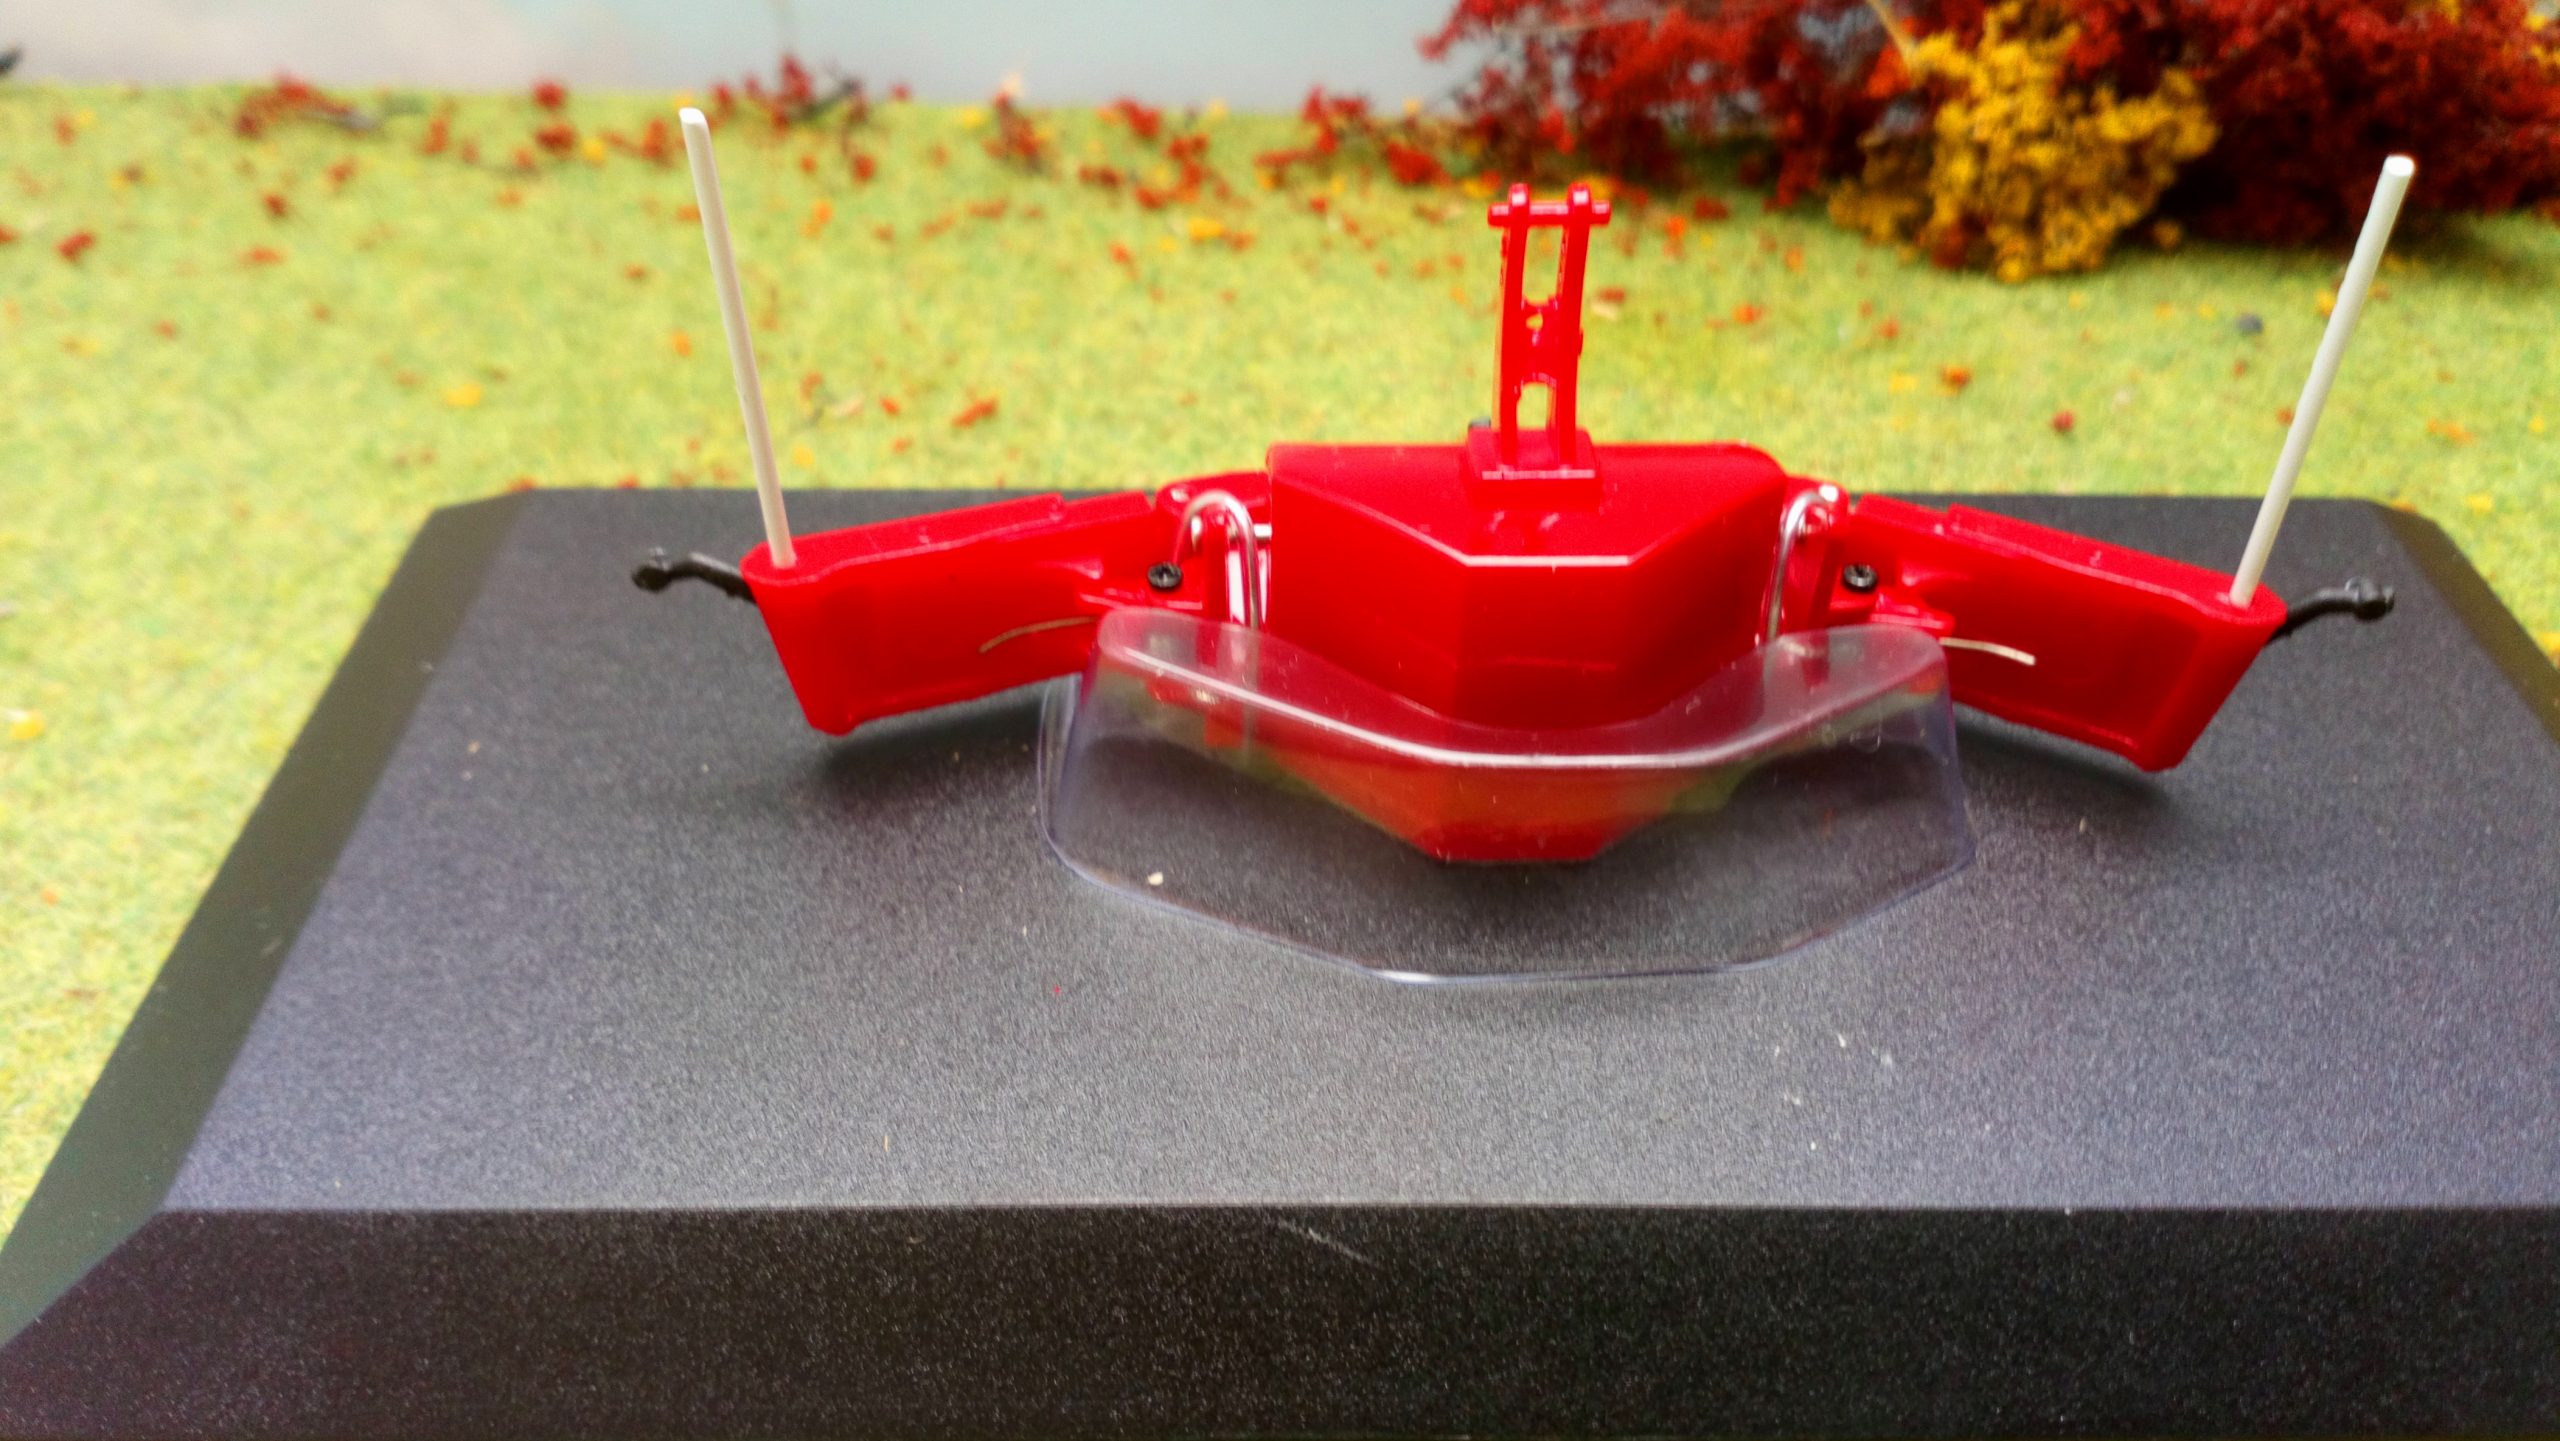 RED UNIVERSAL HOBBIES 6250 1:32 SCALE TRACTOR BUMPER SAFETY WEIGHT 800KG 